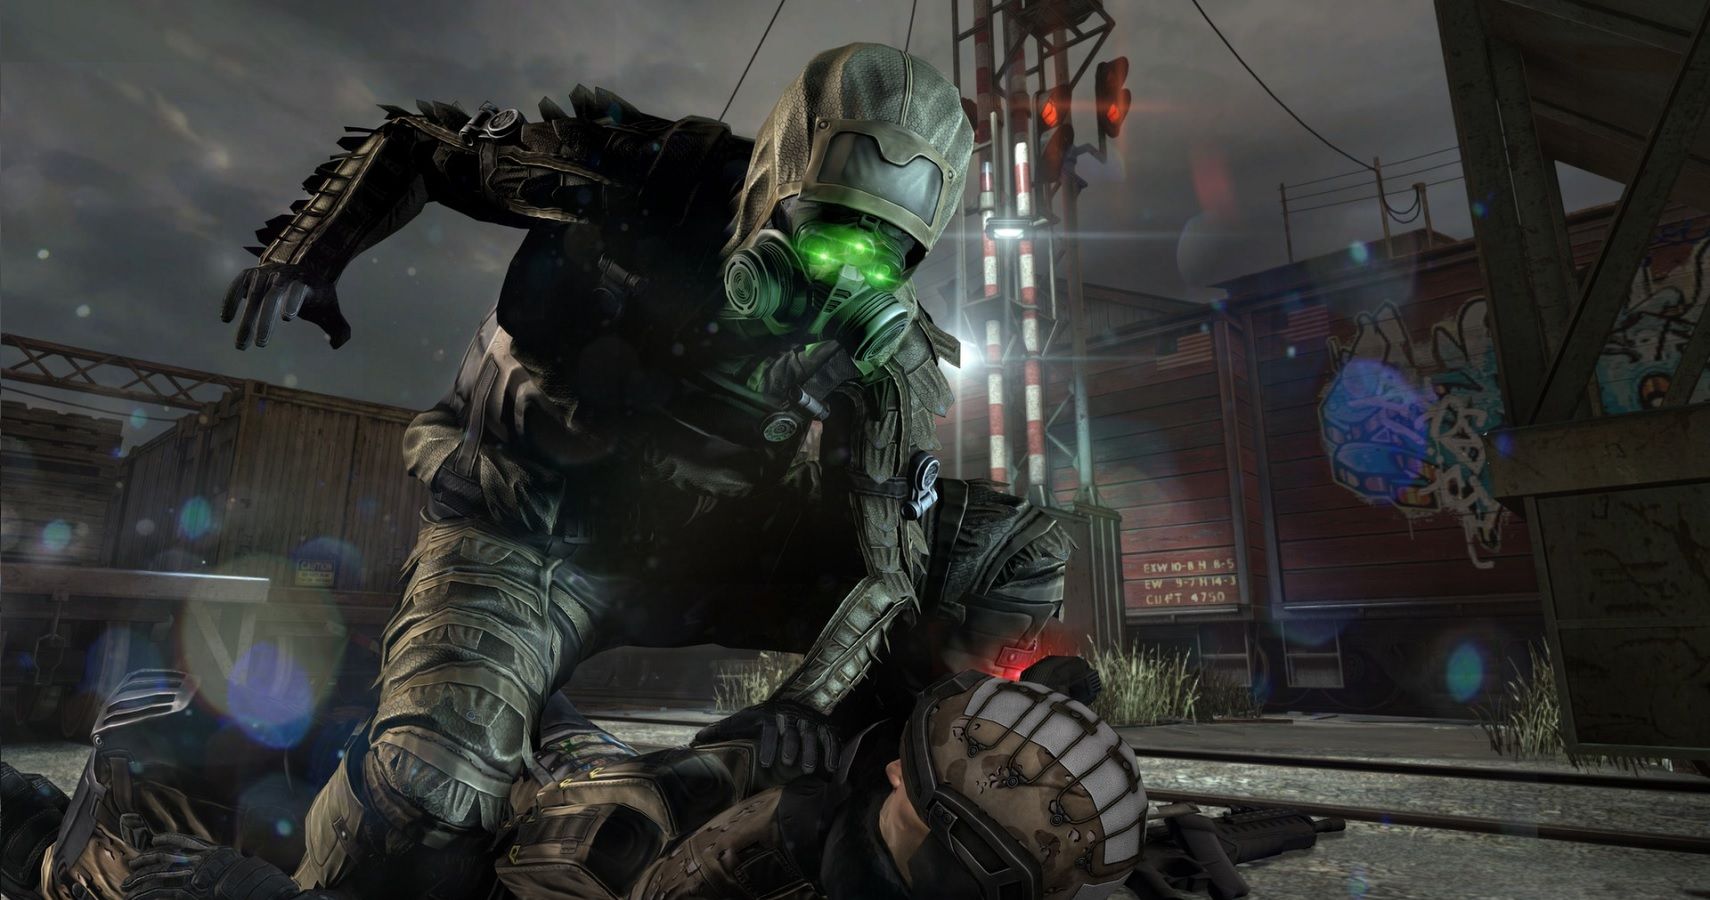 Splinter Cell PS4 and Xbox One Adventure Coming via Ghost Recon Wildlands